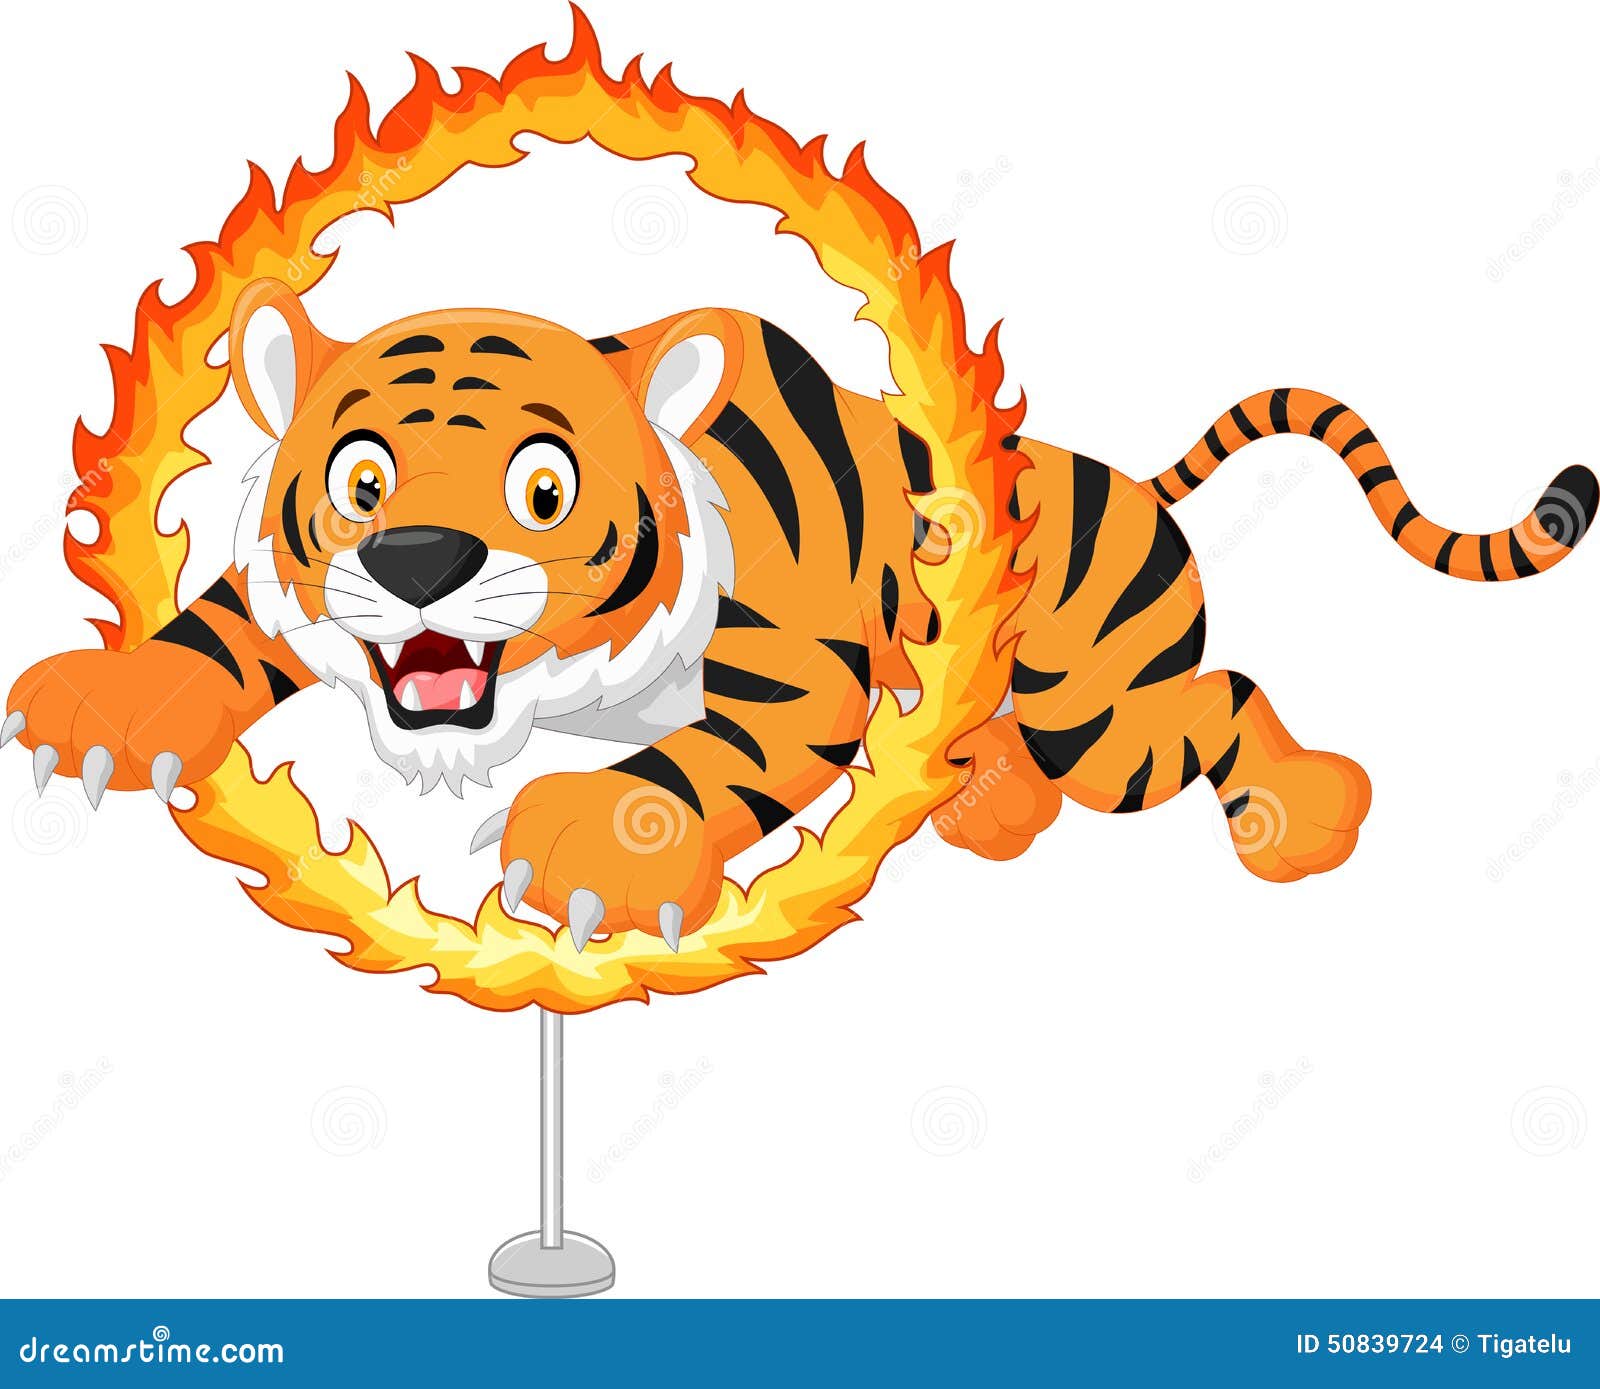 fire ring clipart - photo #44